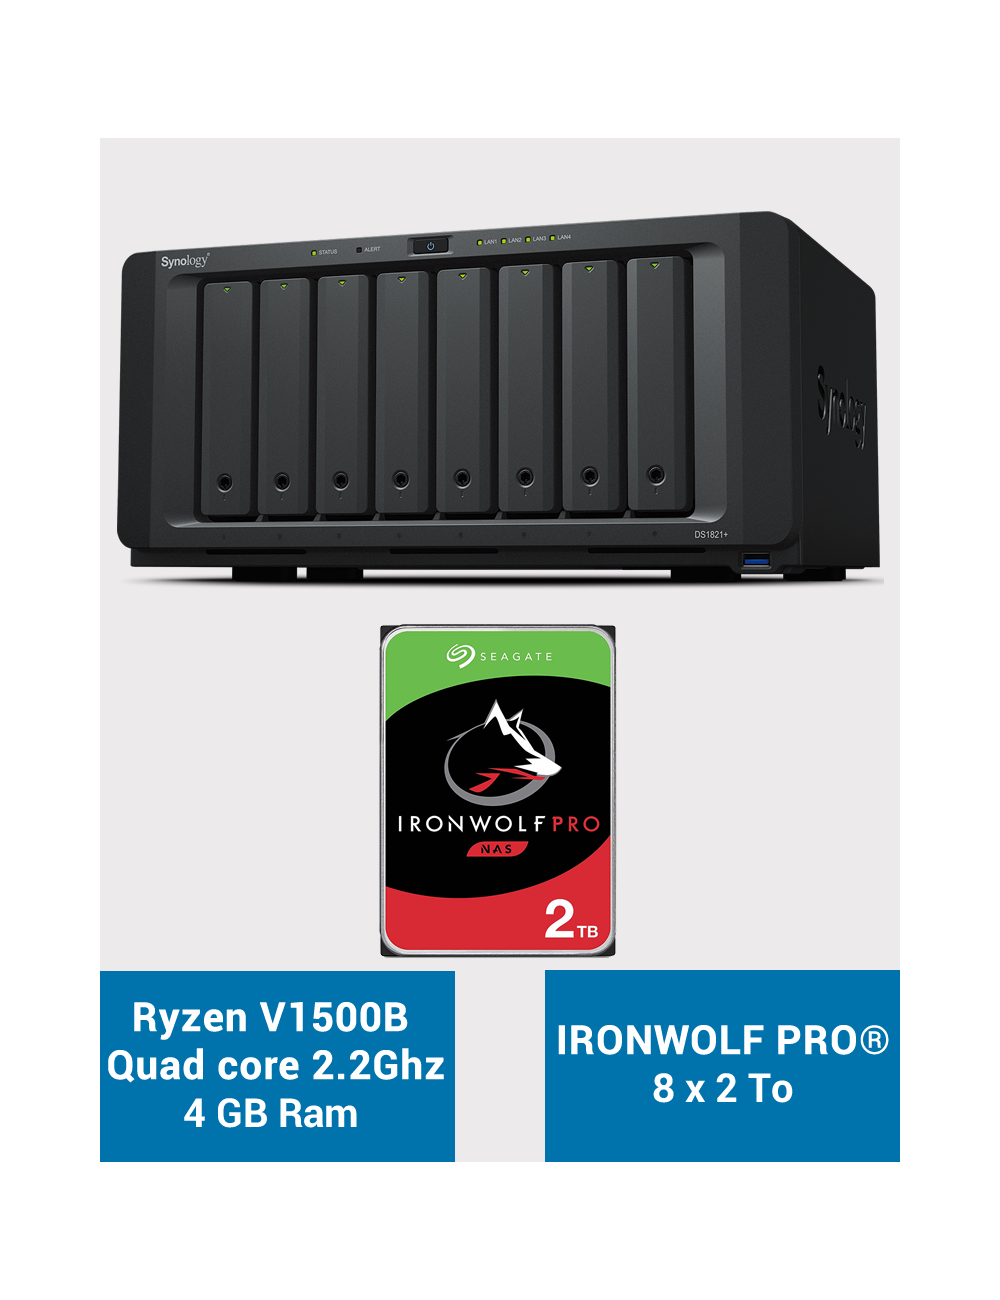 Synology DS1821+ Serveur NAS 8 baies IRONWOLF PRO 16To (8x2To)